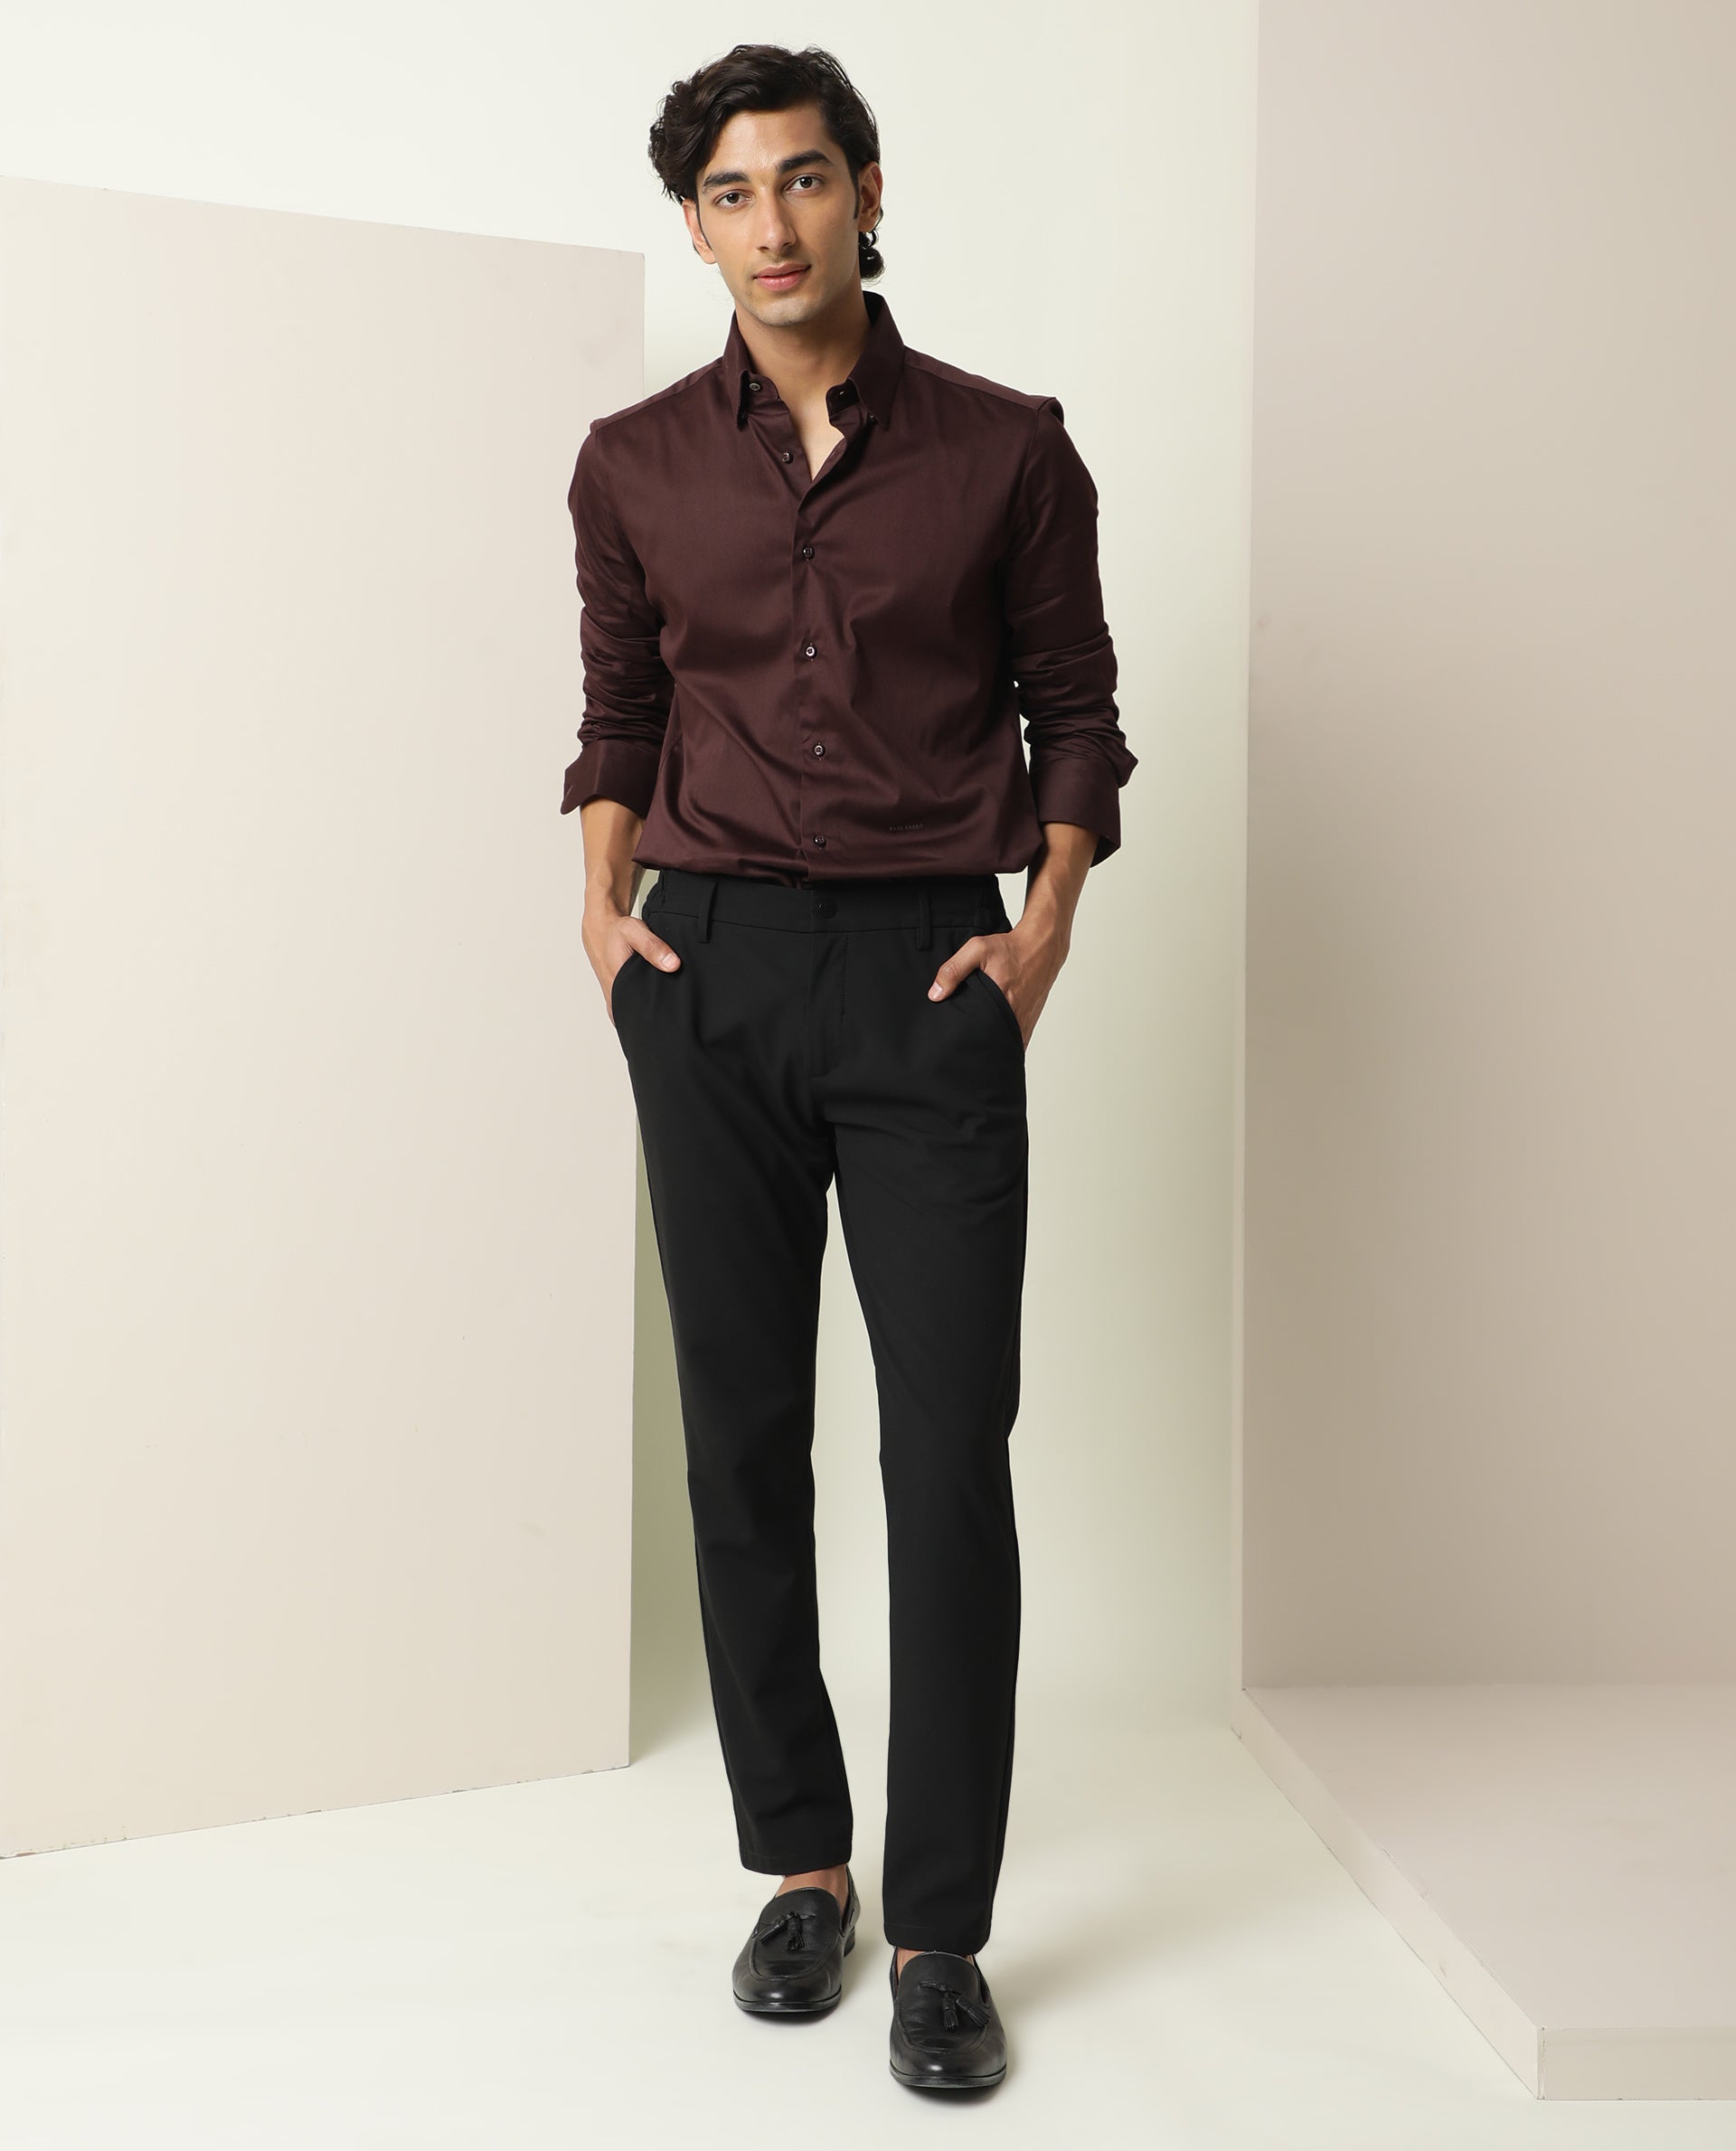 What Color Pants with Maroon Shirt for Guys and Ladies